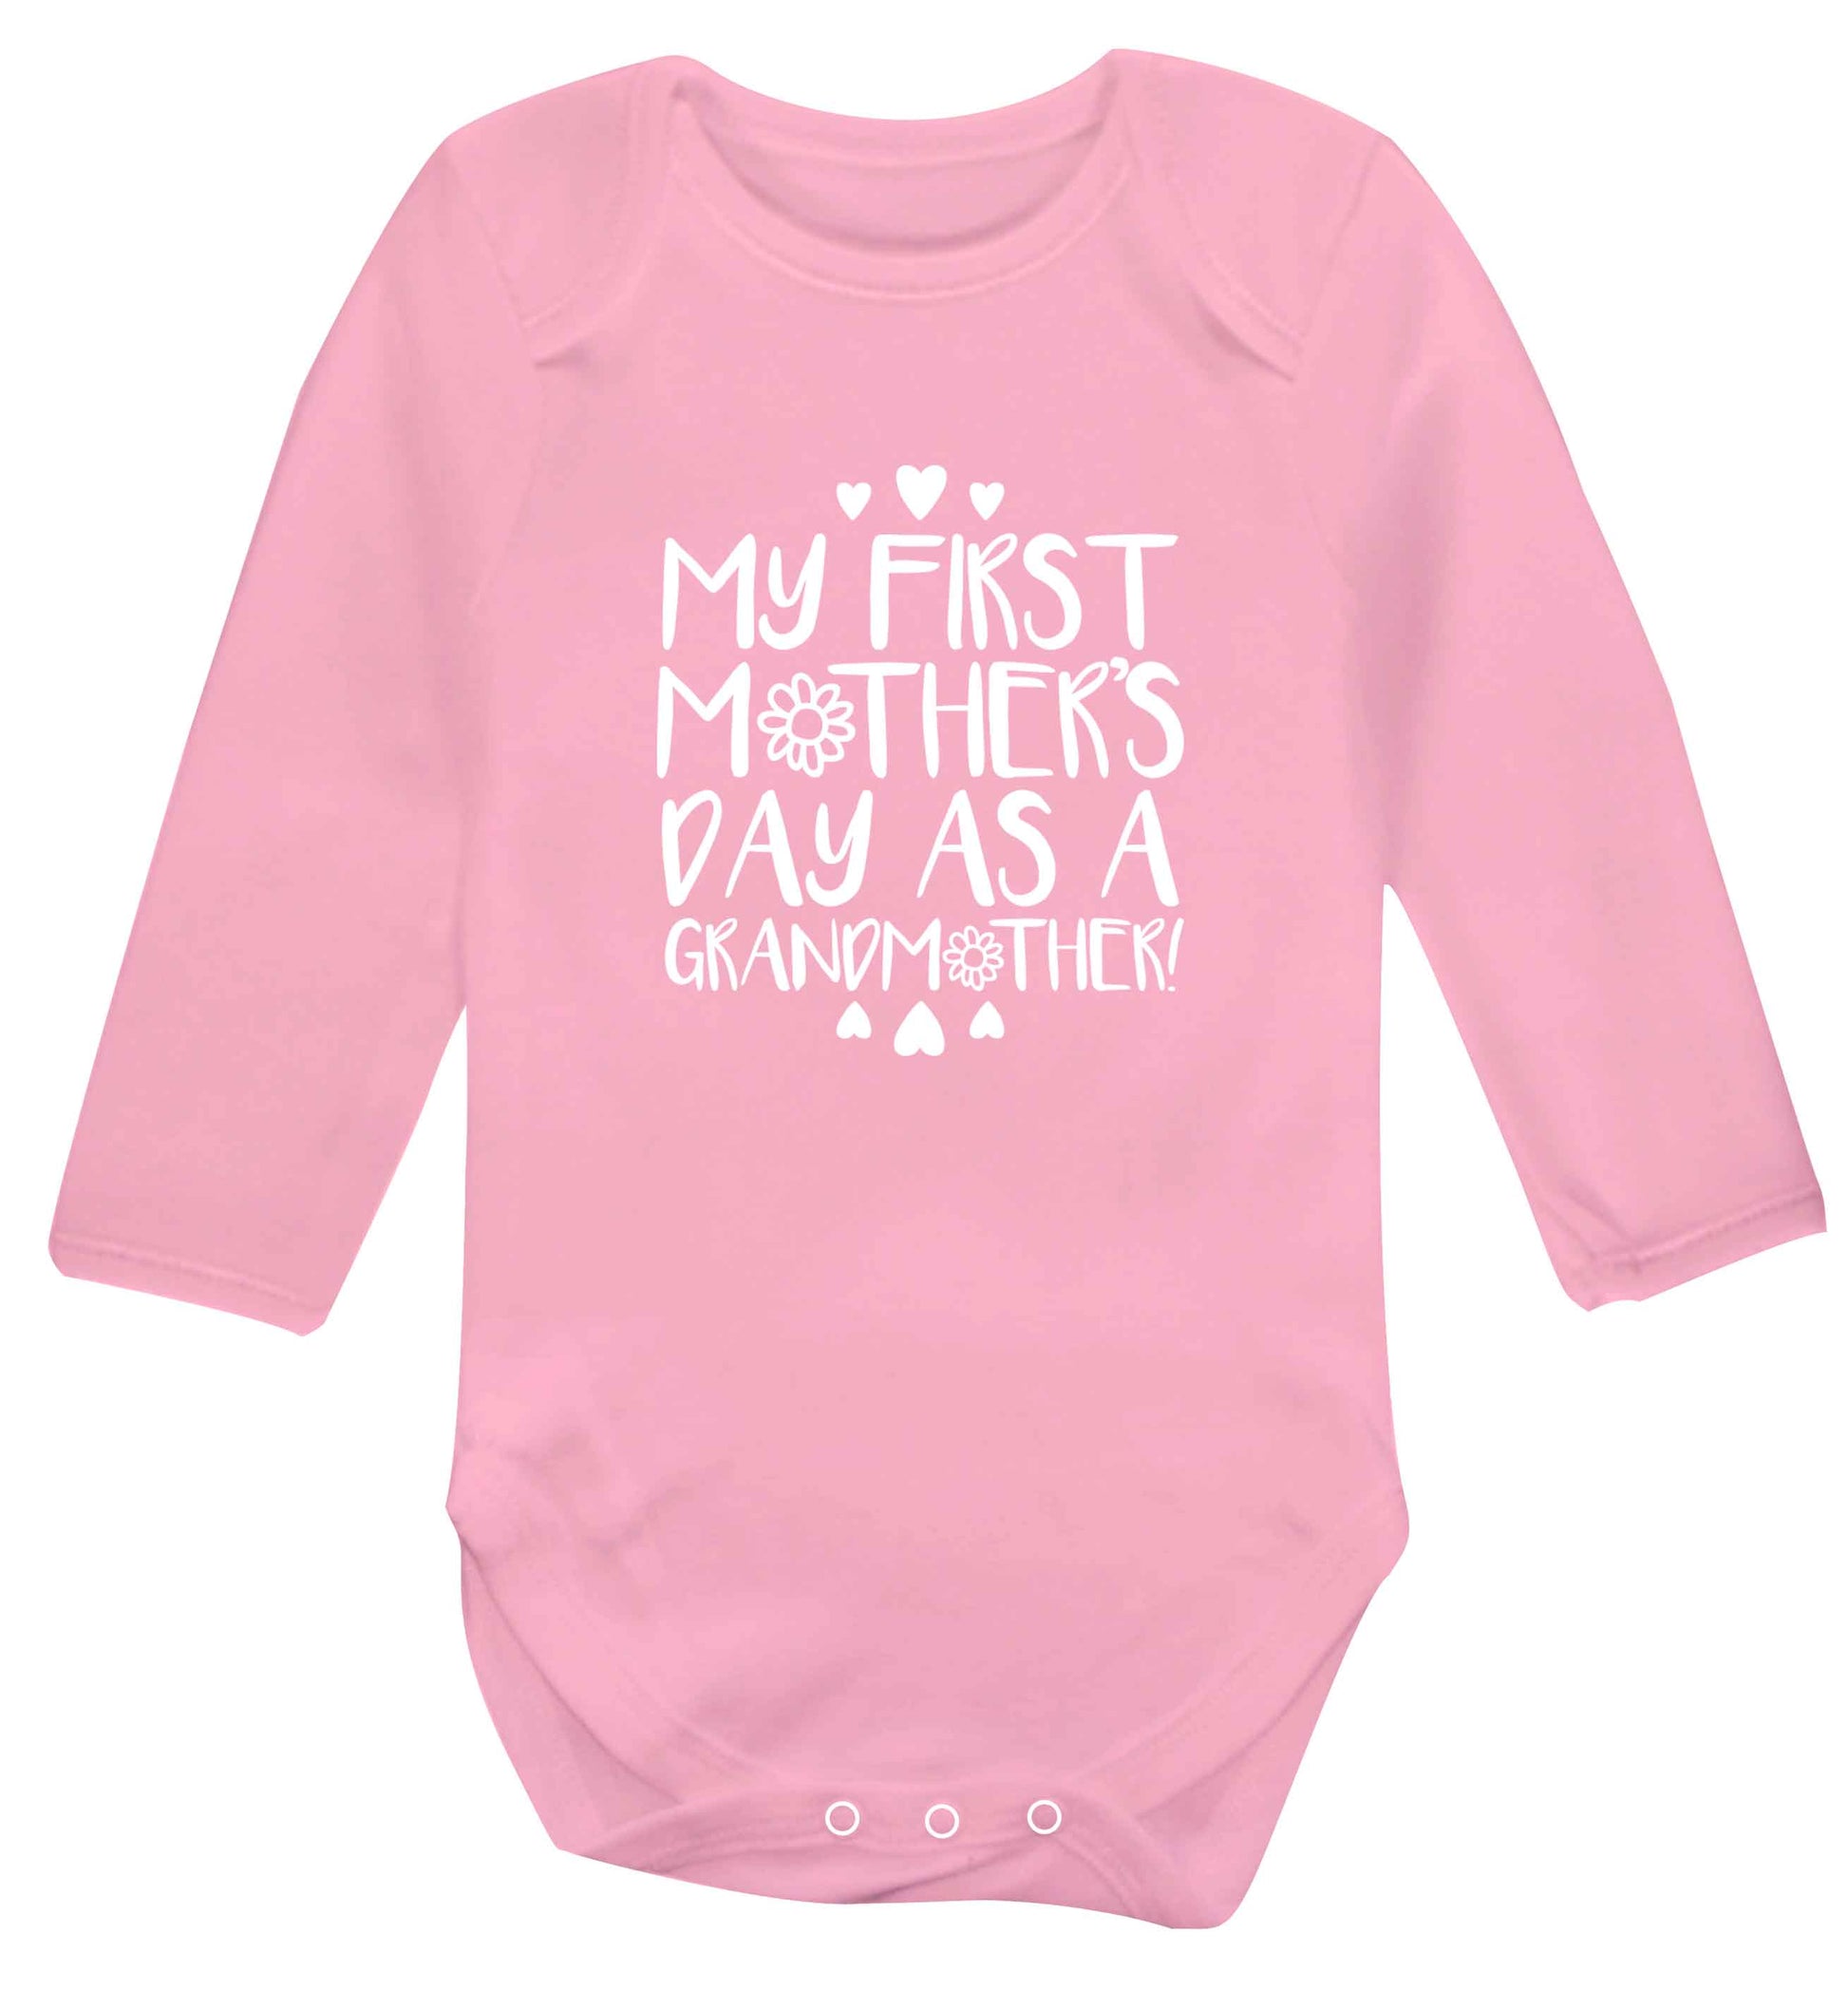 It's my first mother's day as a grandmother baby vest long sleeved pale pink 6-12 months